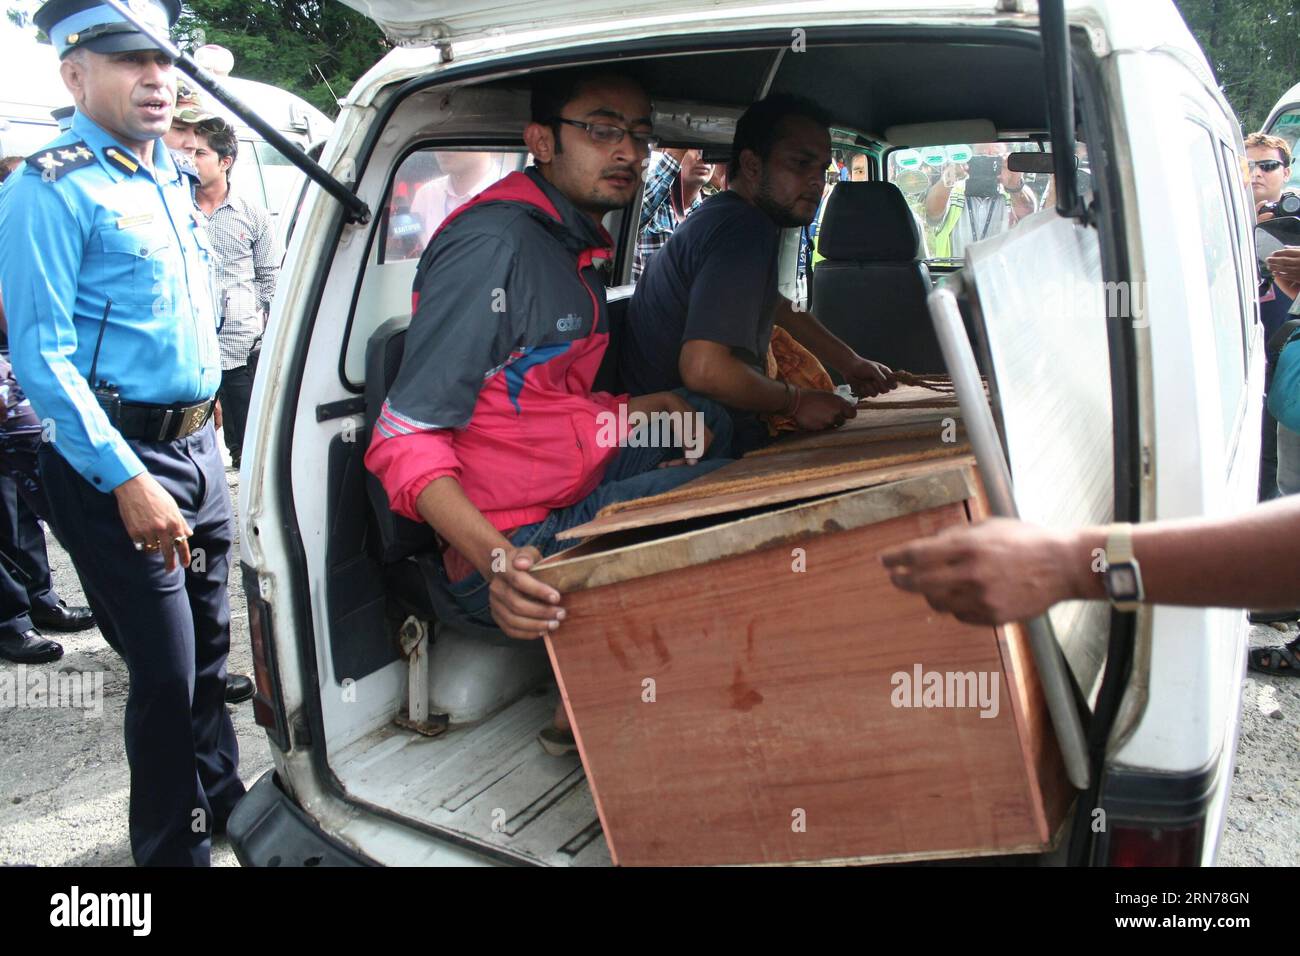 (150825) -- KATHMANDU, Aug. 25, 2015 -- The dead body of Senior Superintendent of Police (SSP) Laxman Neupane killed in a clash with protesters at Tikapur is brought to capital for further funeral procession in Kathmandu, Nepal, Aug. 25, 2015. The death toll in the violent clash that erupted over the proposed federalism in the far western Nepal has reached to 20, local media reported. ) NEPAL-KATHMANDU-CLASH-POLICE SunilxSharma PUBLICATIONxNOTxINxCHN   150825 Kathmandu Aug 25 2015 The Dead Body of Senior Superintendent of Police SSP LAXMAN Neupane KILLED in a Clash With protesters AT  IS BROUG Stock Photo